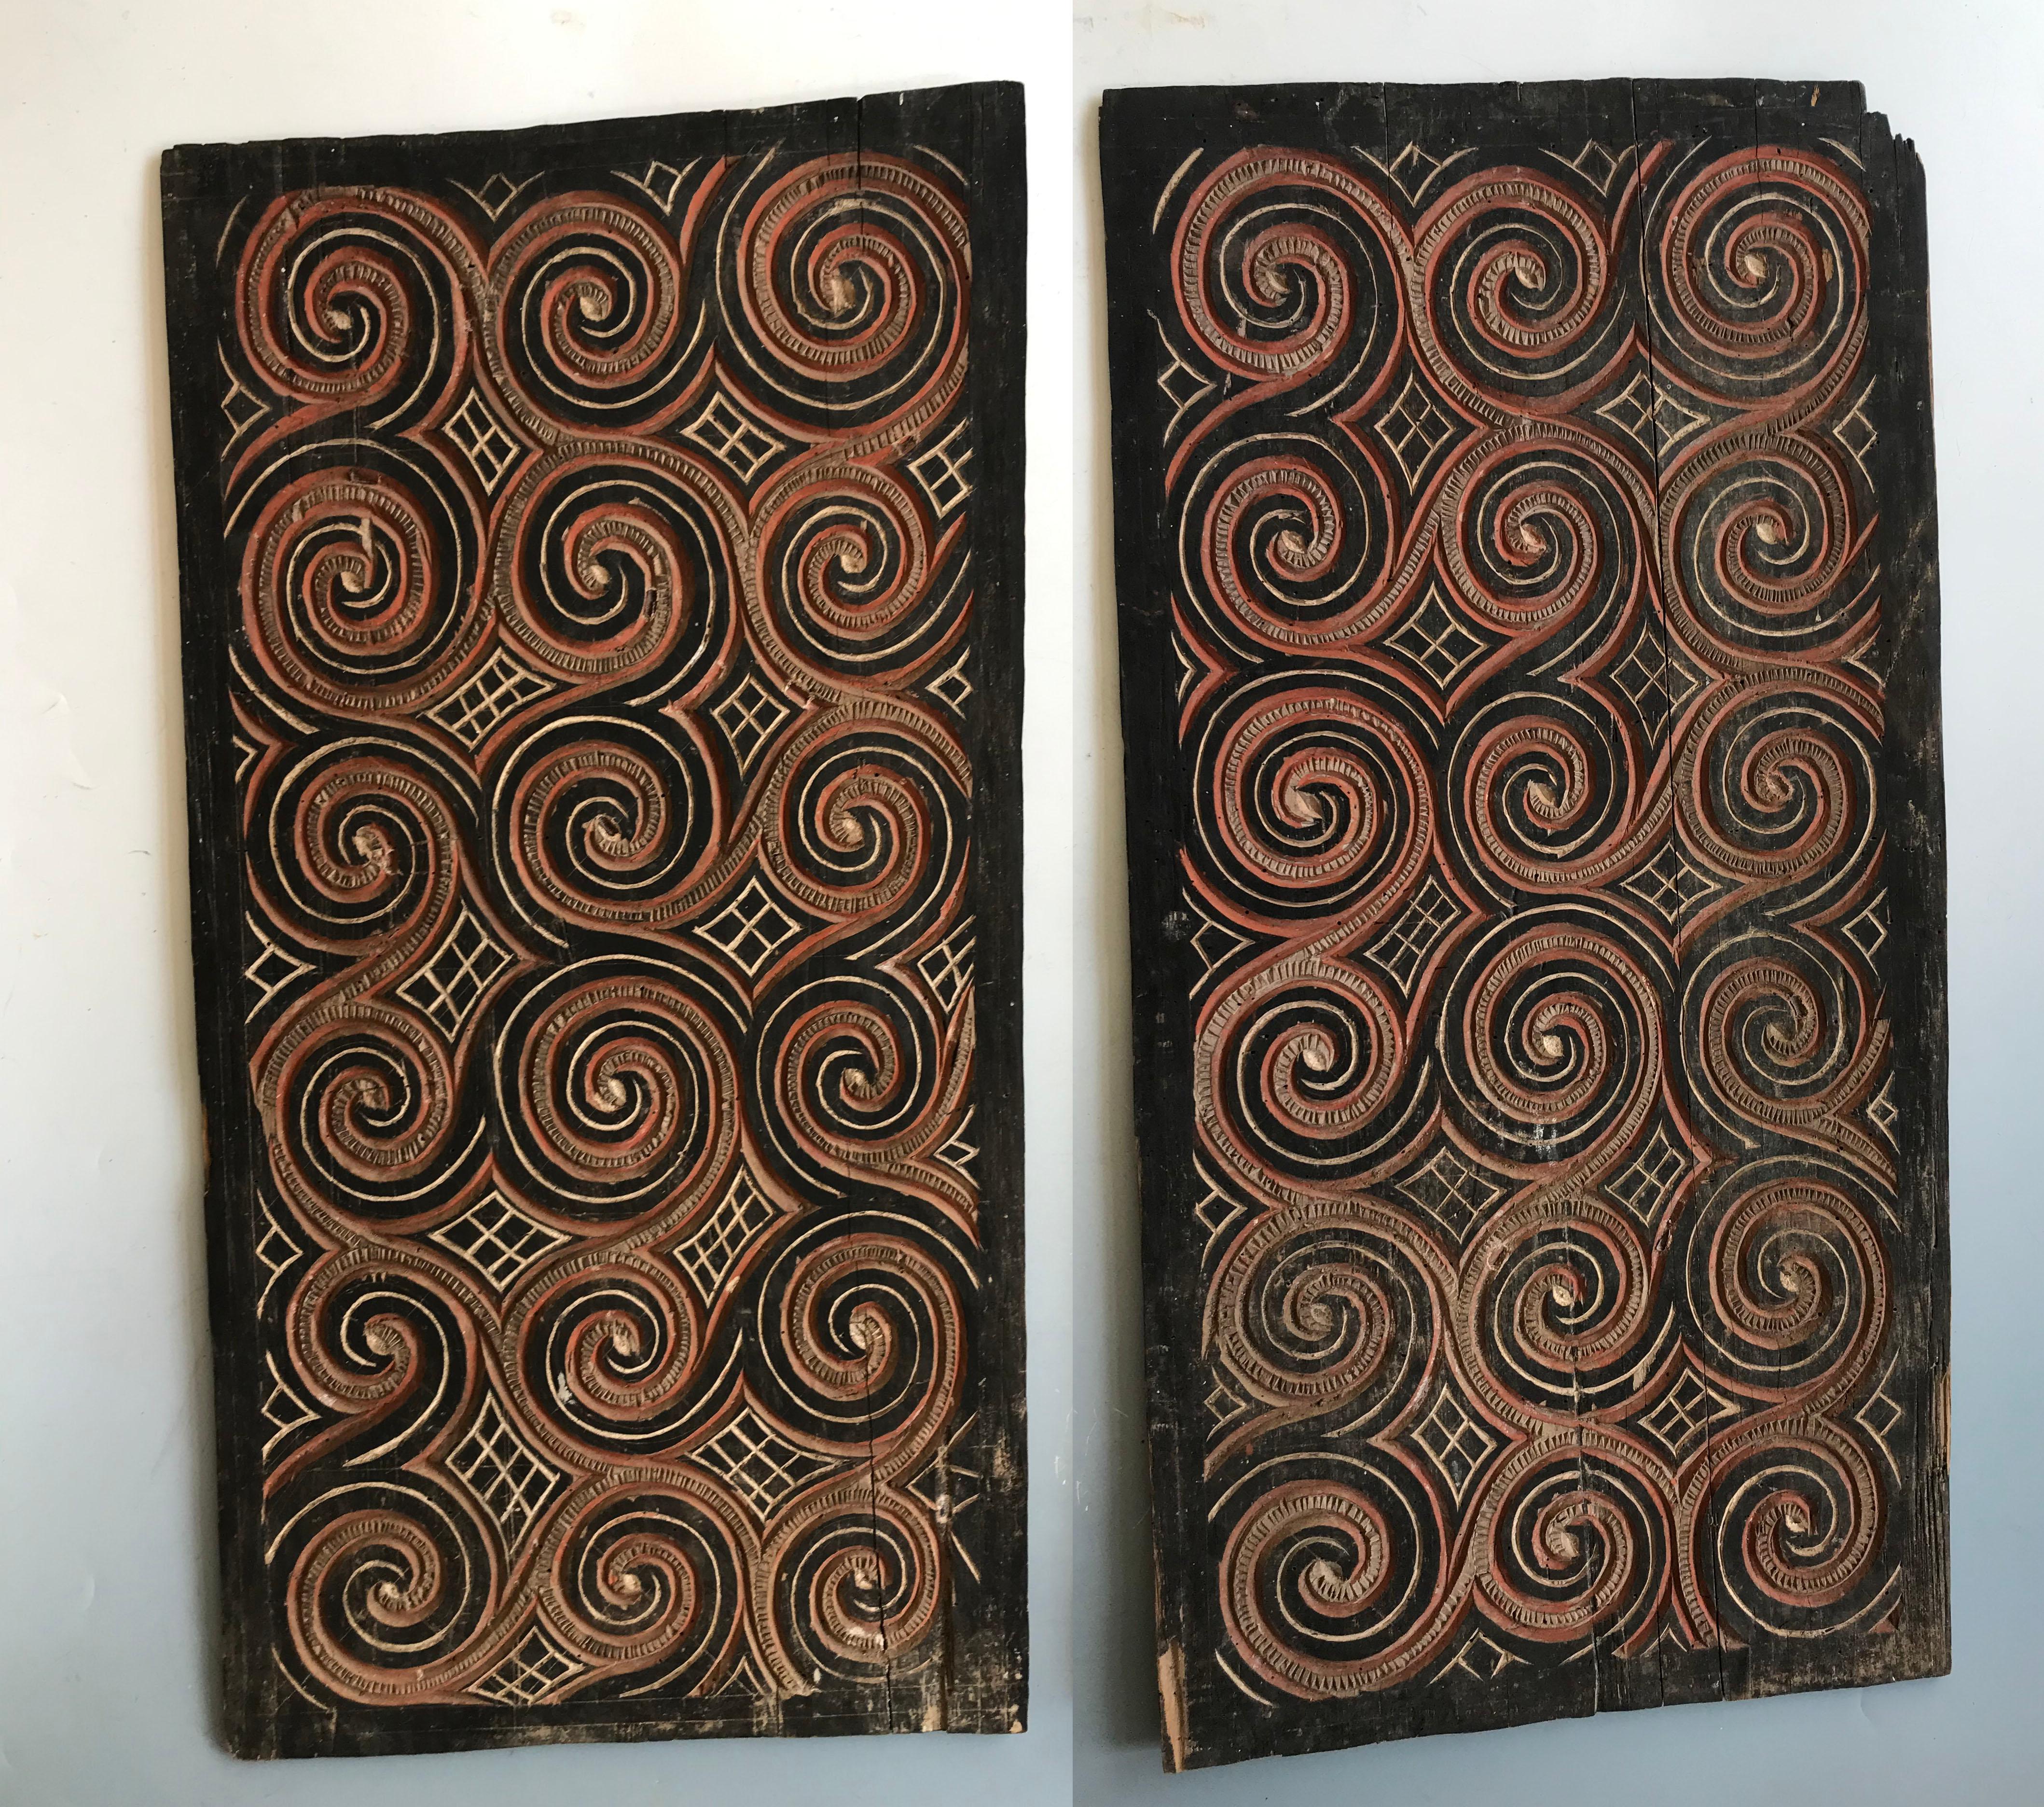 A wonderful pair of Toraja wood panels with carved swirling circular patterns painted with natural pigments,

Toraja People Central Highlands Sulawesi

Carved and painted wood from a house or ceremonial structure

65 x 34 cm 24 13.5 inches